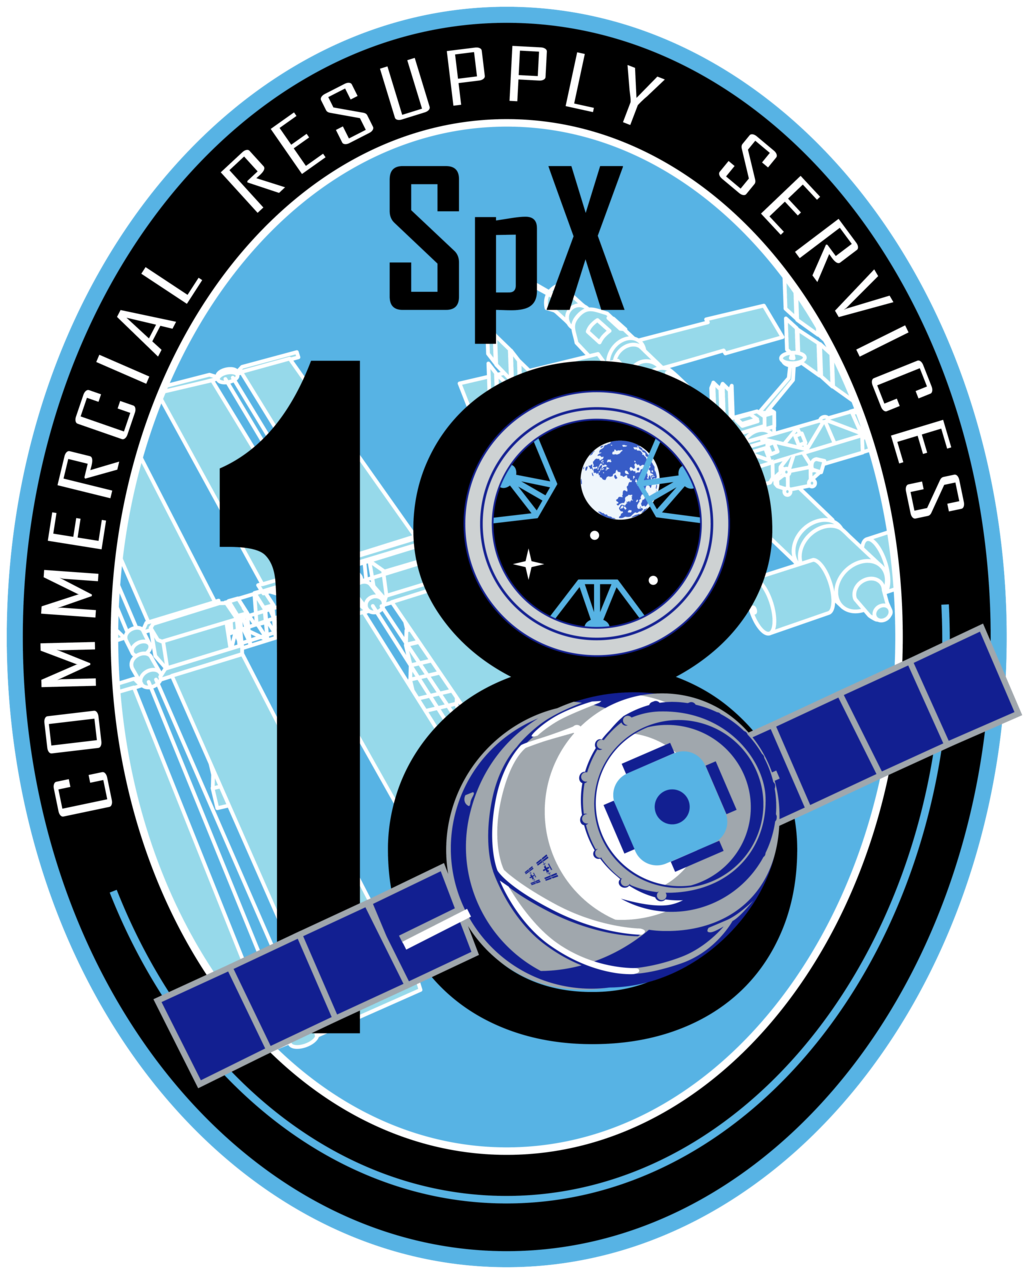 Mission patch for SpX CRS-18